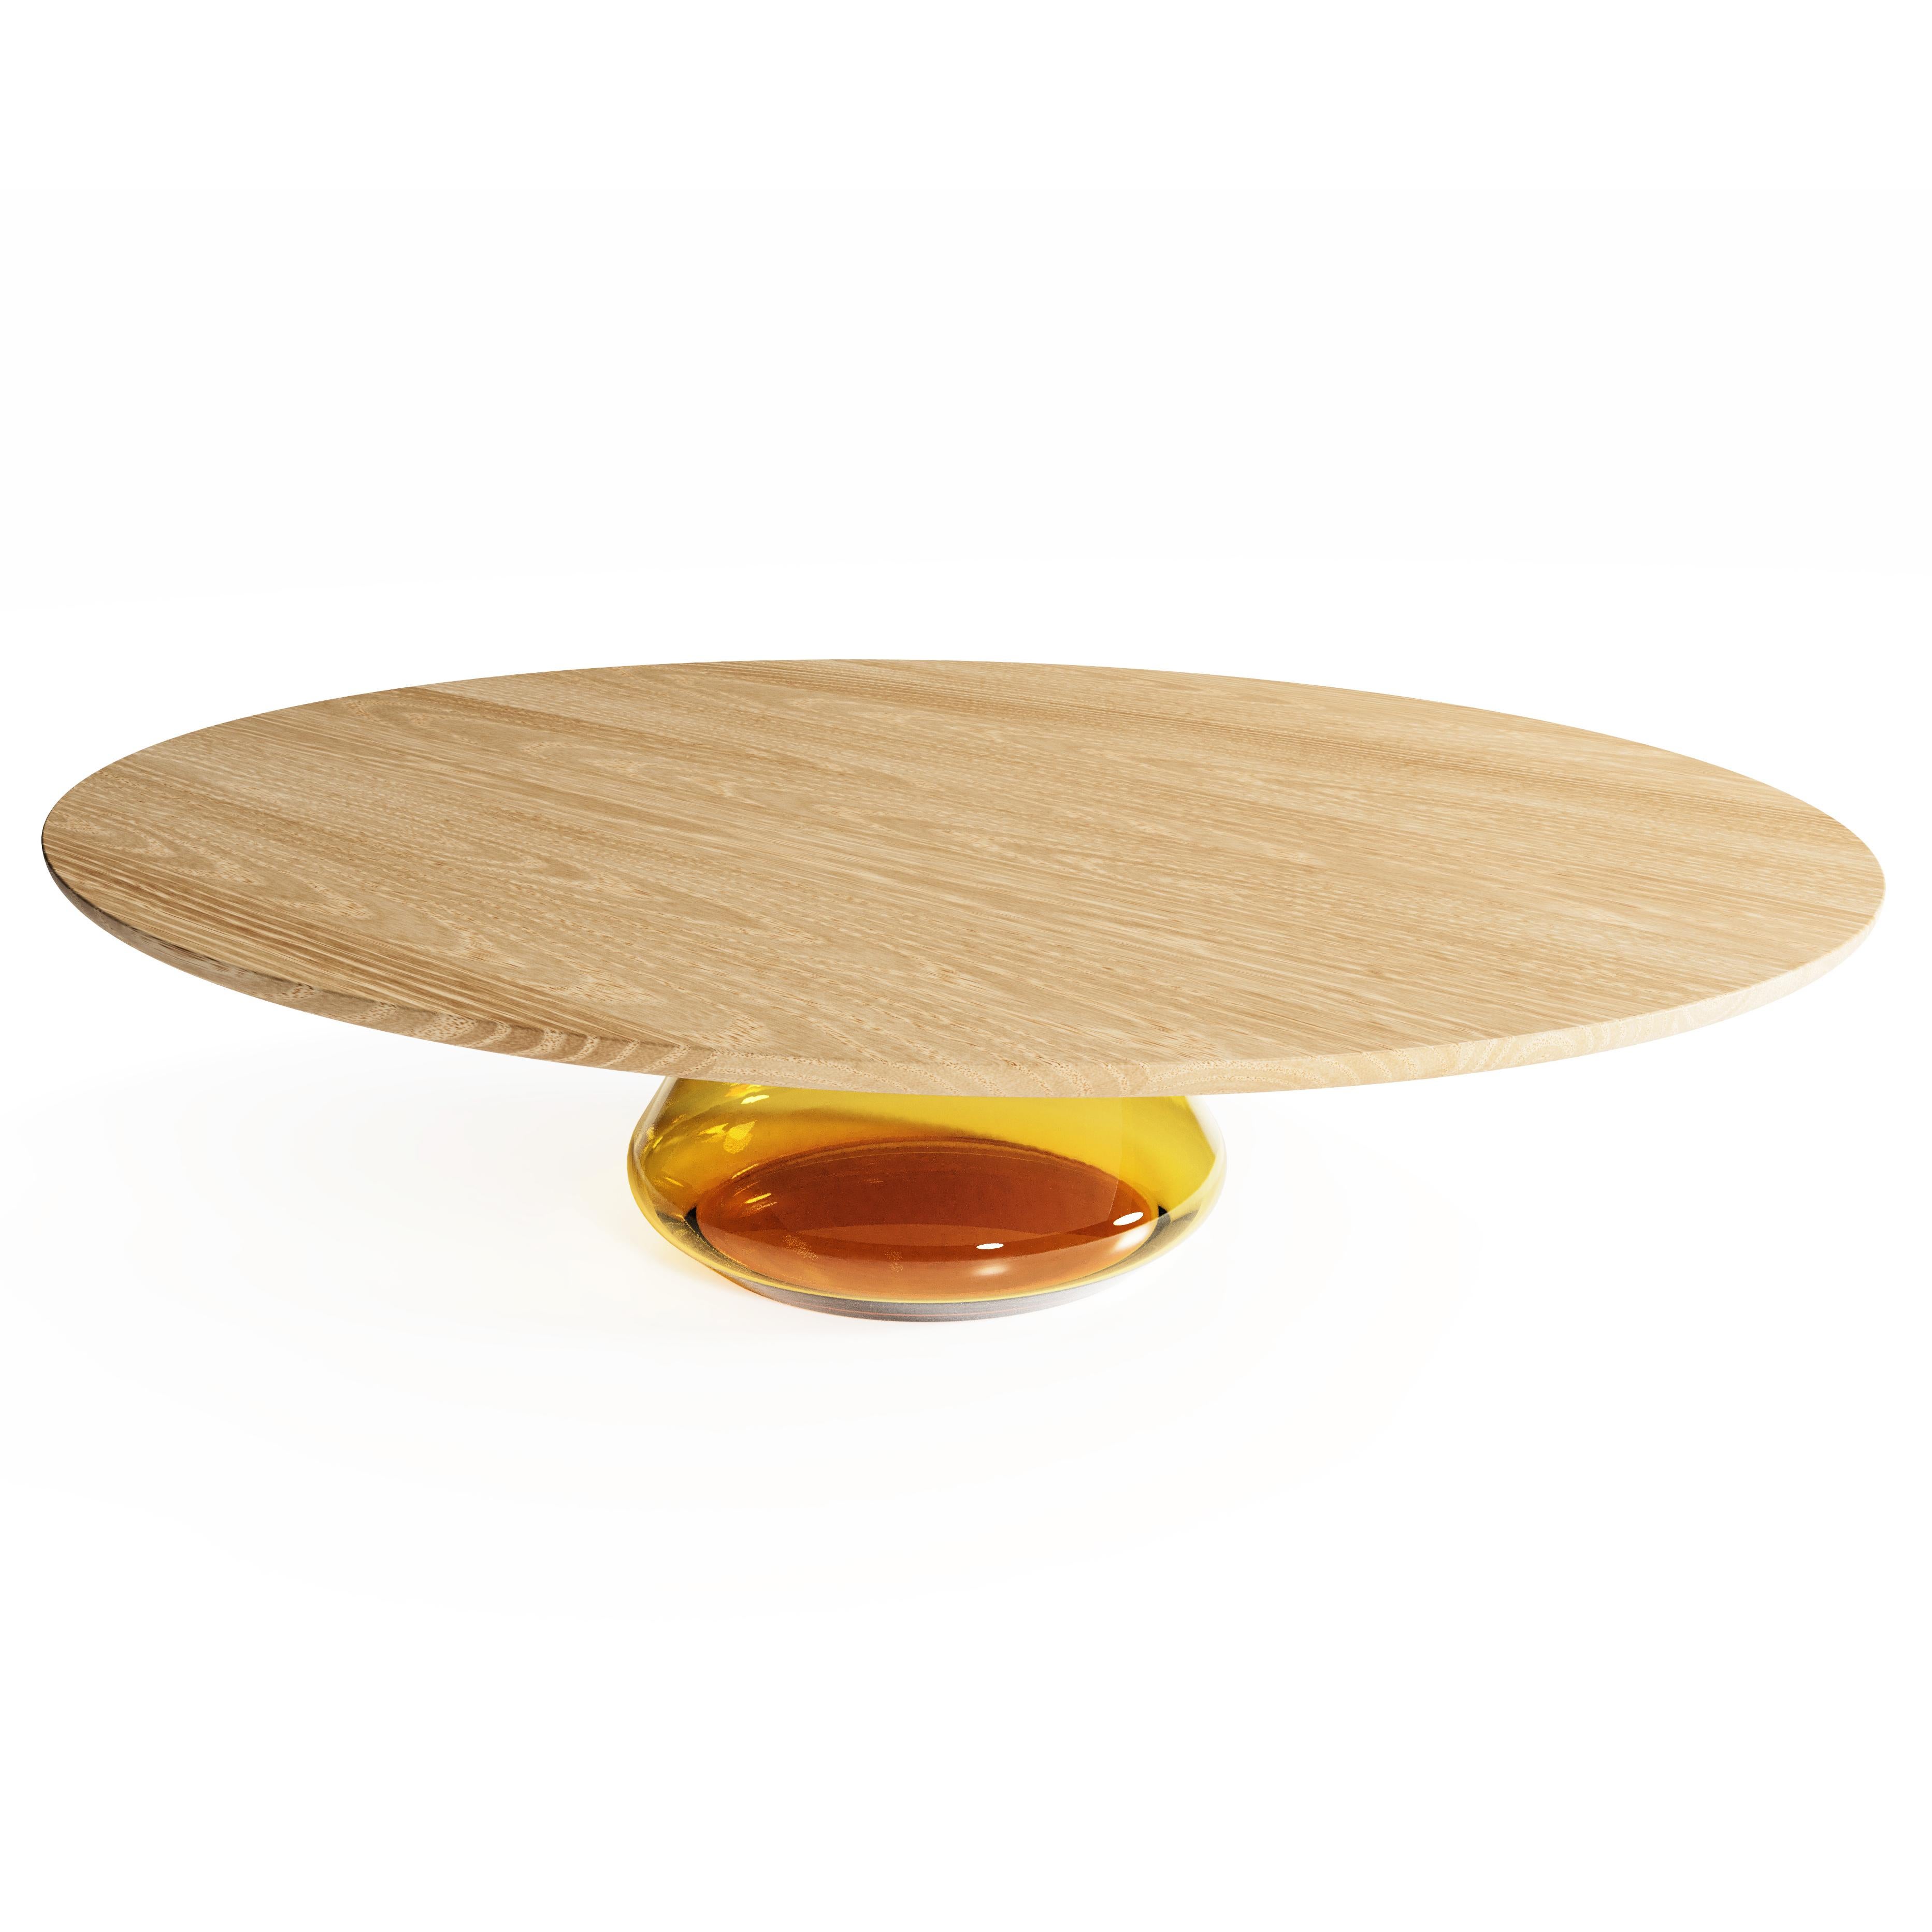 Modern The Amber Eclipse I, Limited Edition Coffee Table by Grzegorz Majka